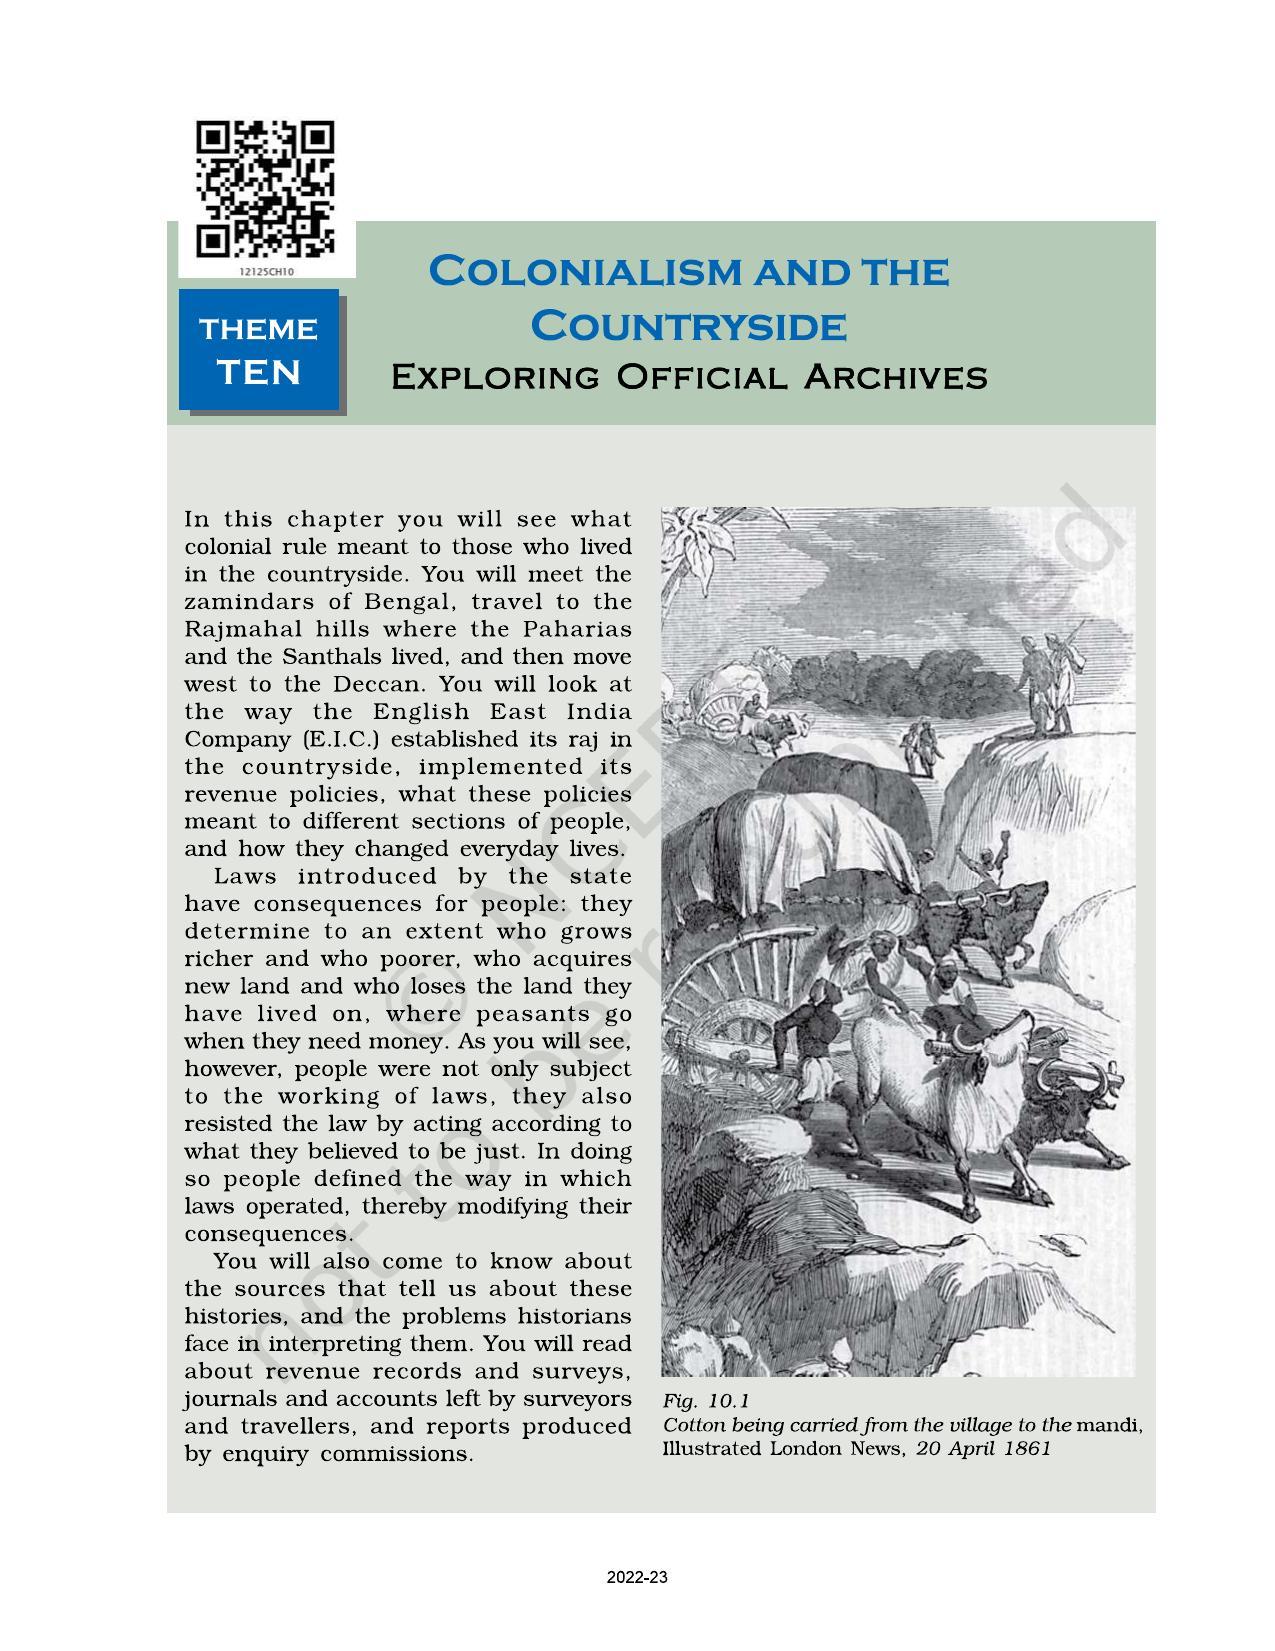 NCERT Book for Class 12 History (Part-II) Chapter 10 Colonialism and the Countryside - Page 1